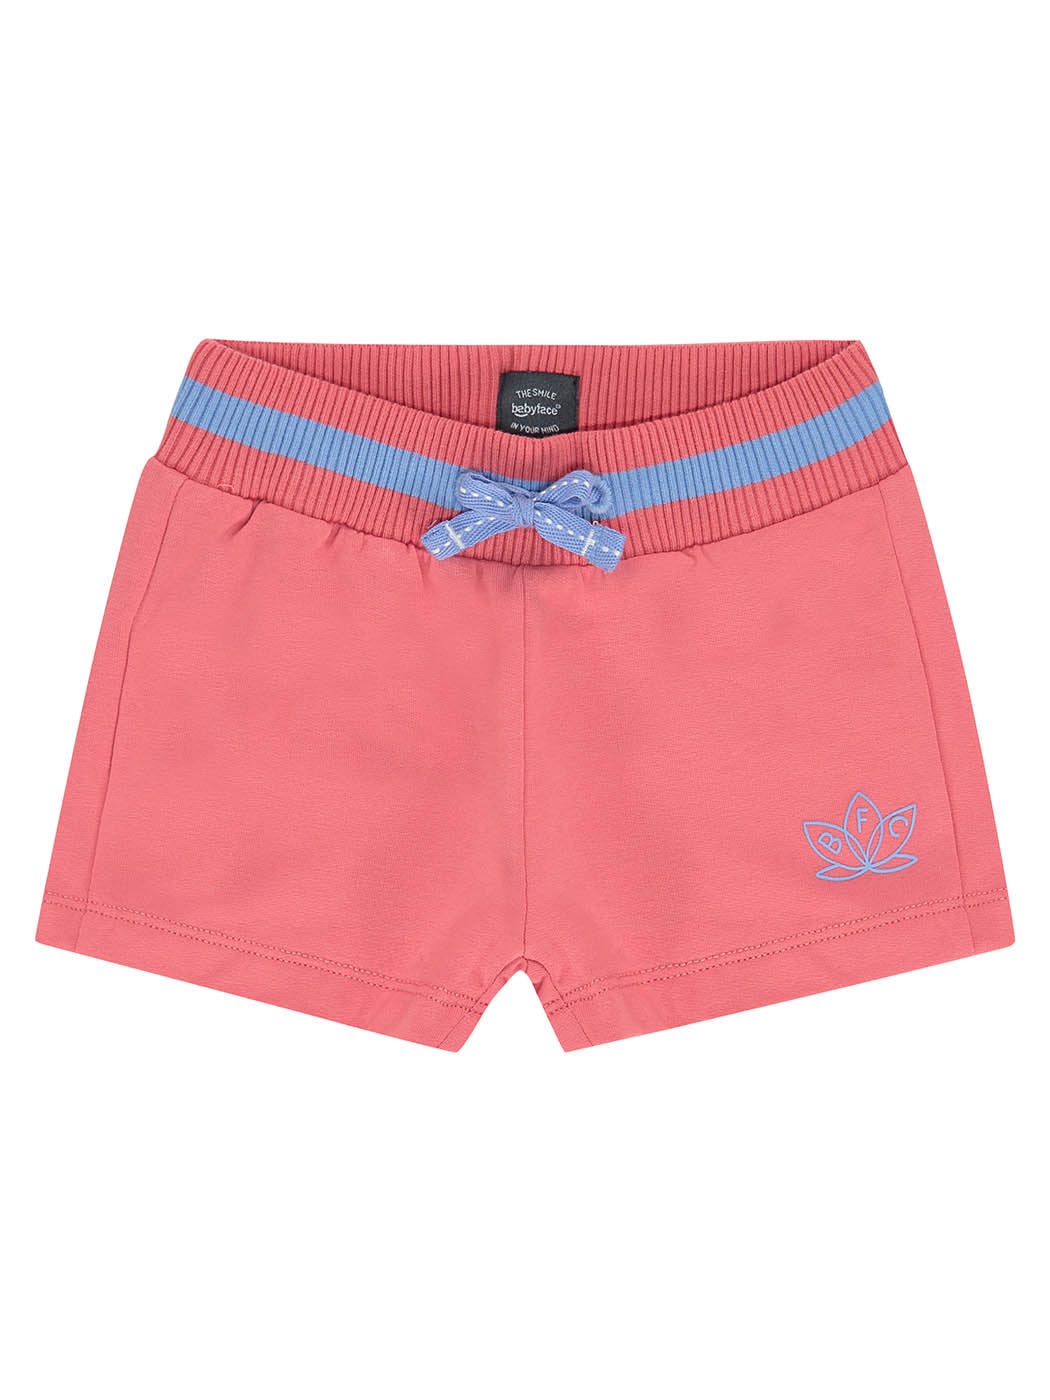 Babyface - Sweat shorts for girl - BBE21208244 Pink